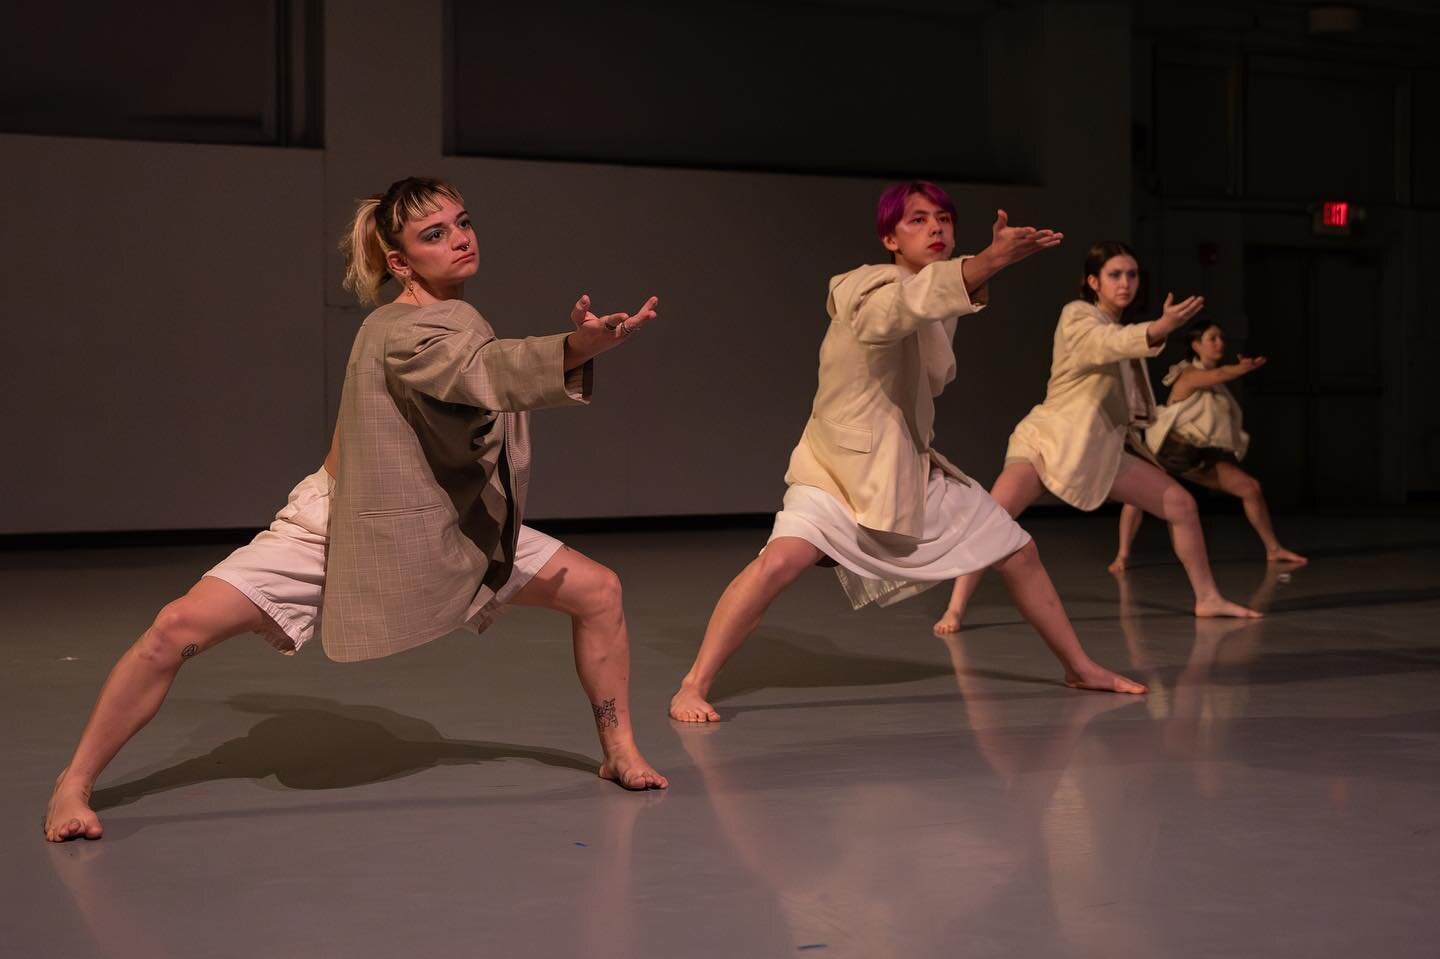 Consider this your formal invitation to:

@uartsschoolofdance Festival of Senior Thesis Works (dancing in Program C on Friday and Sunday in the wonderfully wacky work of @meglilllie with 5 other beauties💛 at YGym)

my Research As Action (no tix requ